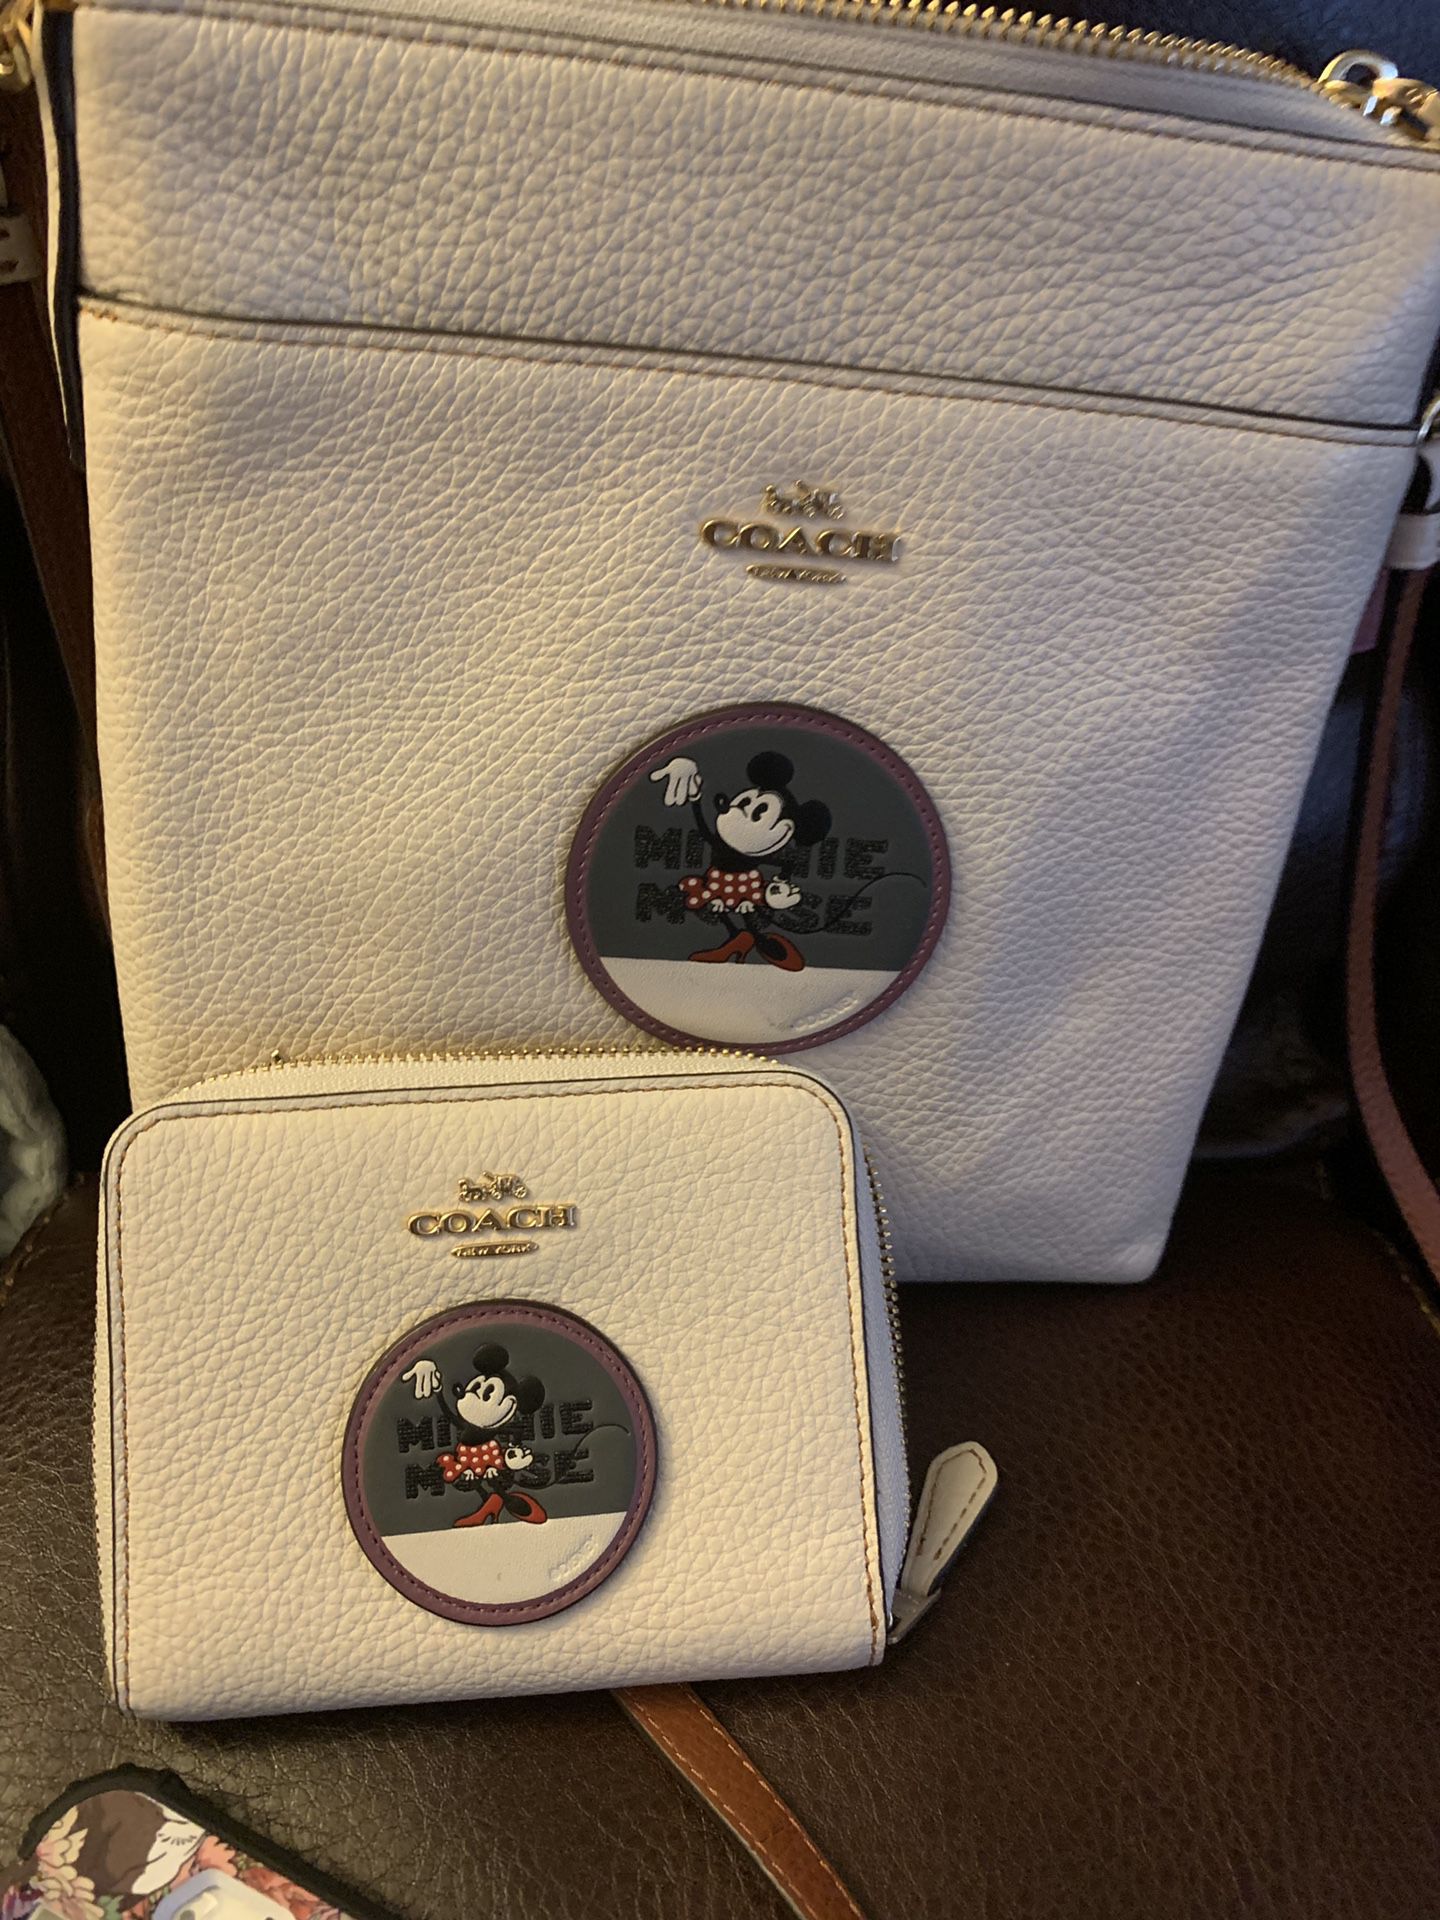 Coach x Disney Minnie Mouse Crossbody bag and wallet